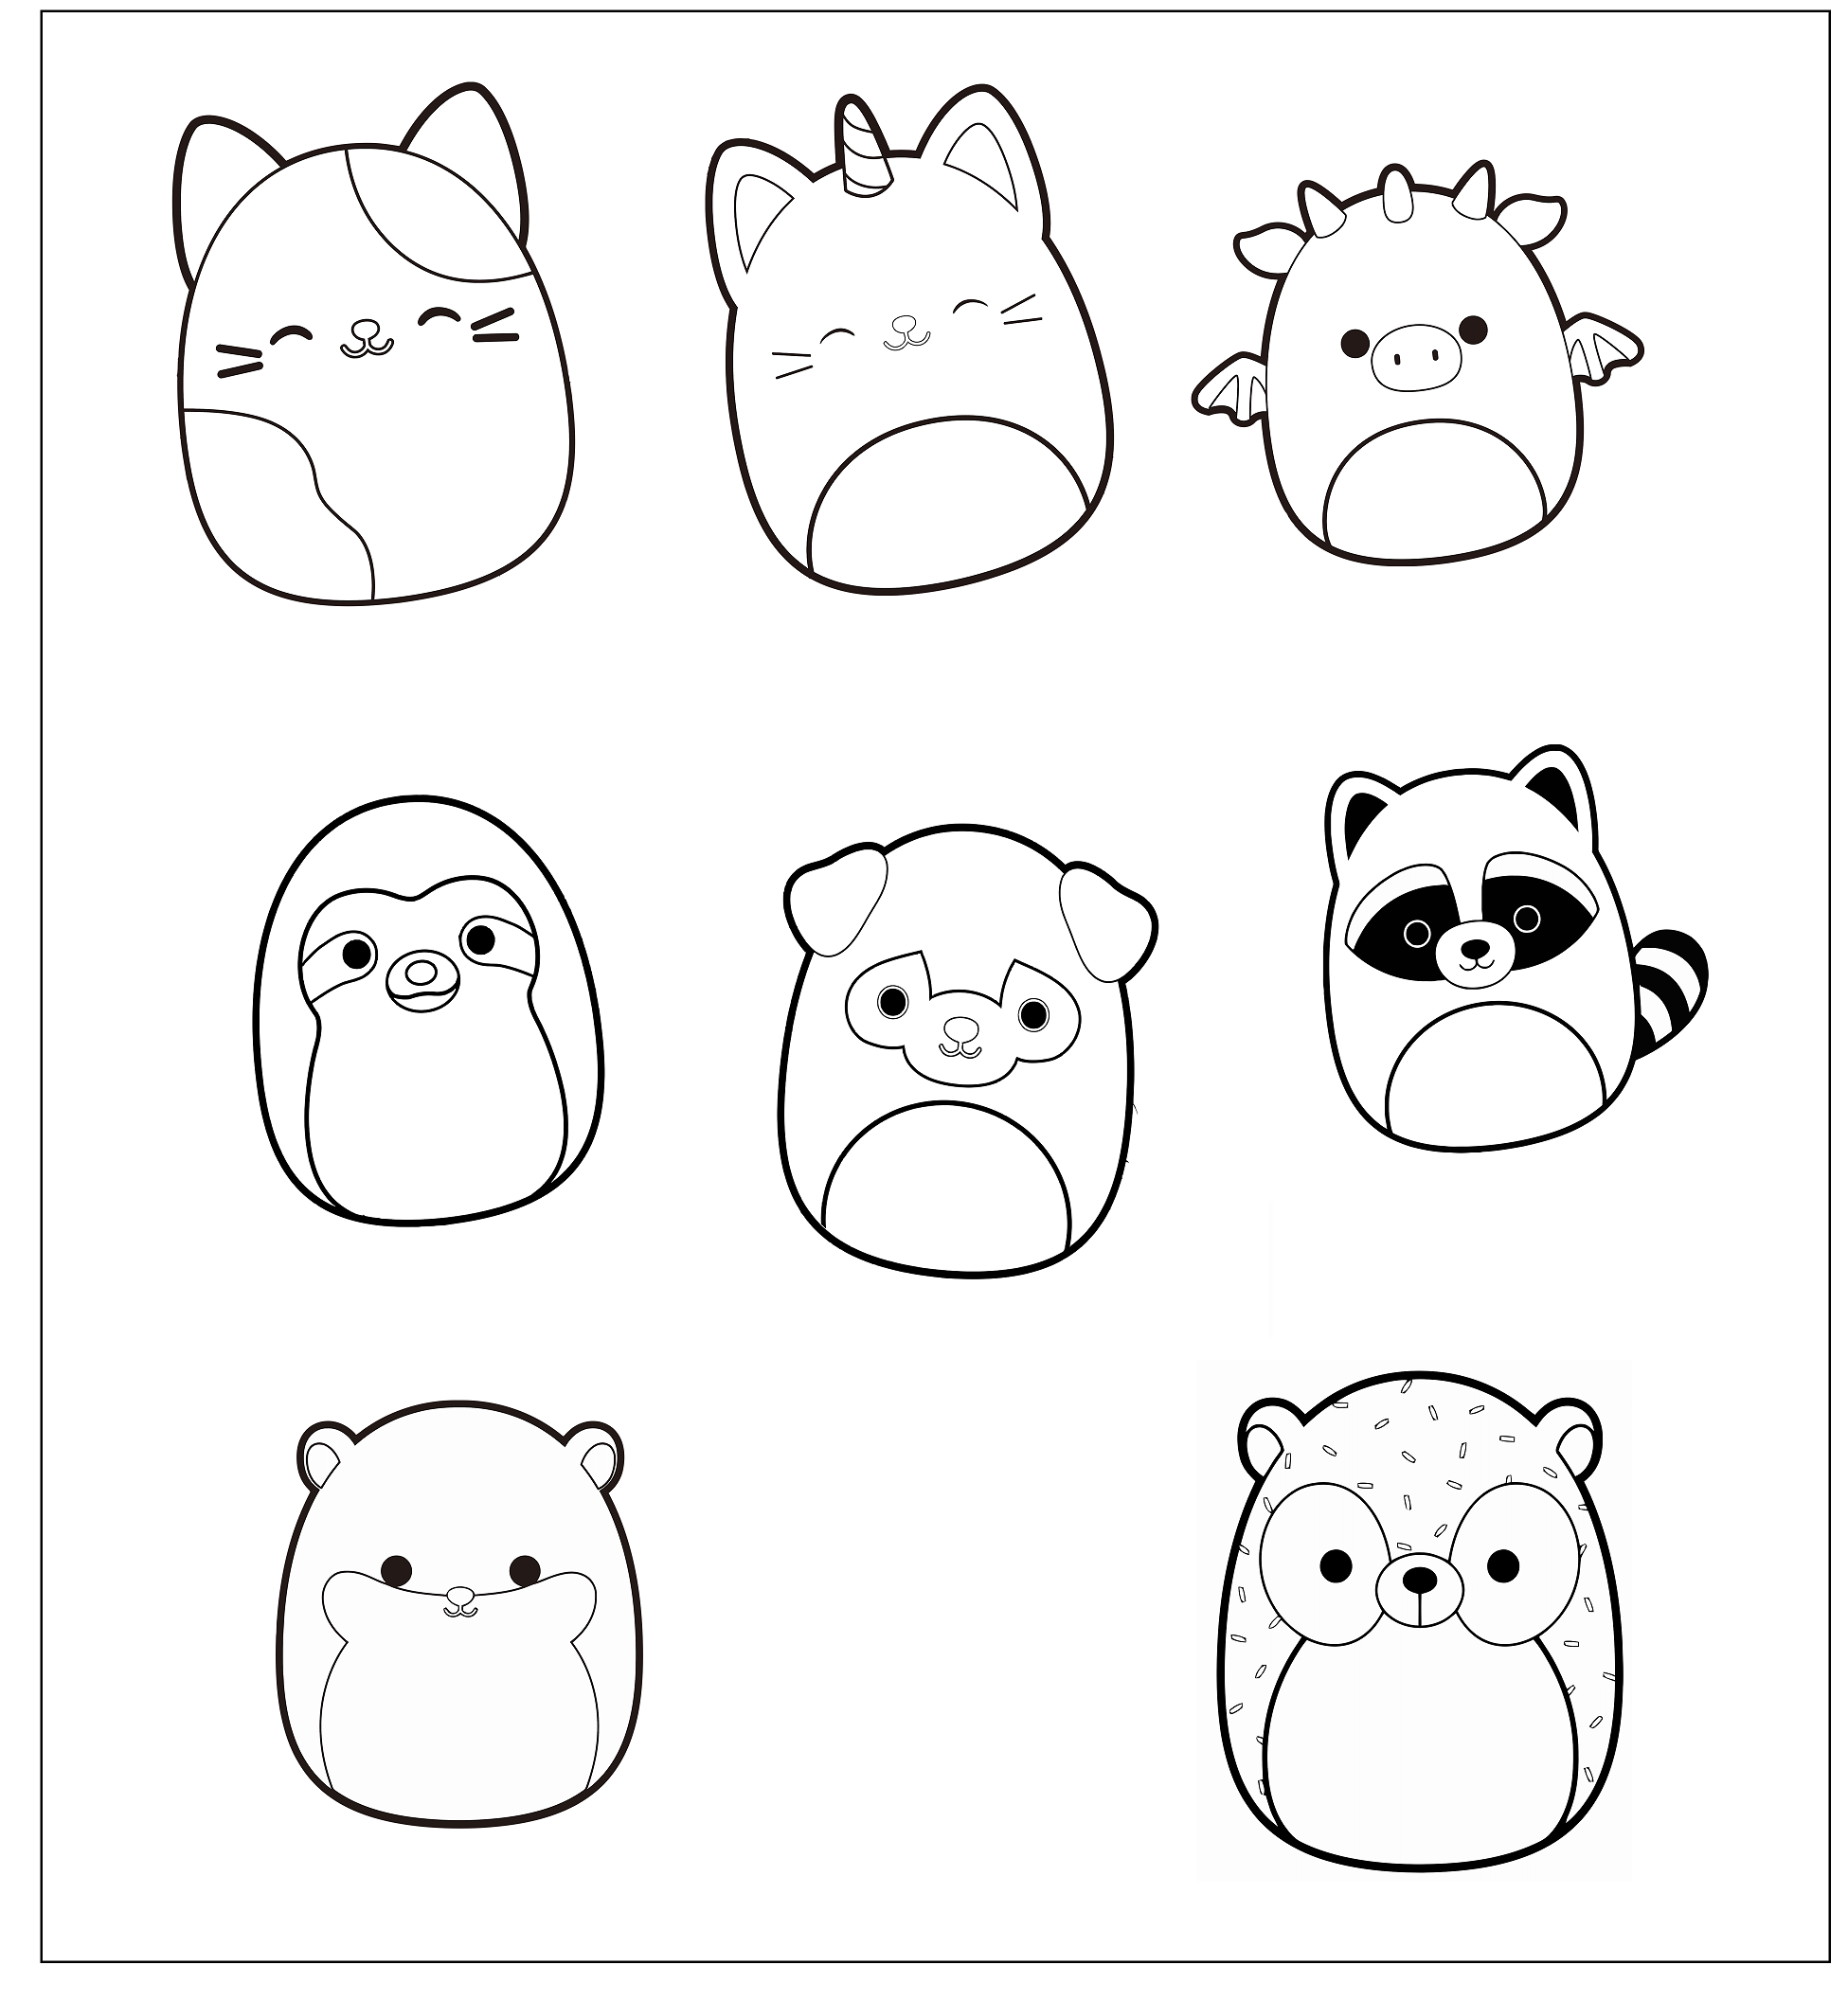 Printable Squishmallow   1 Coloring Page for kids.